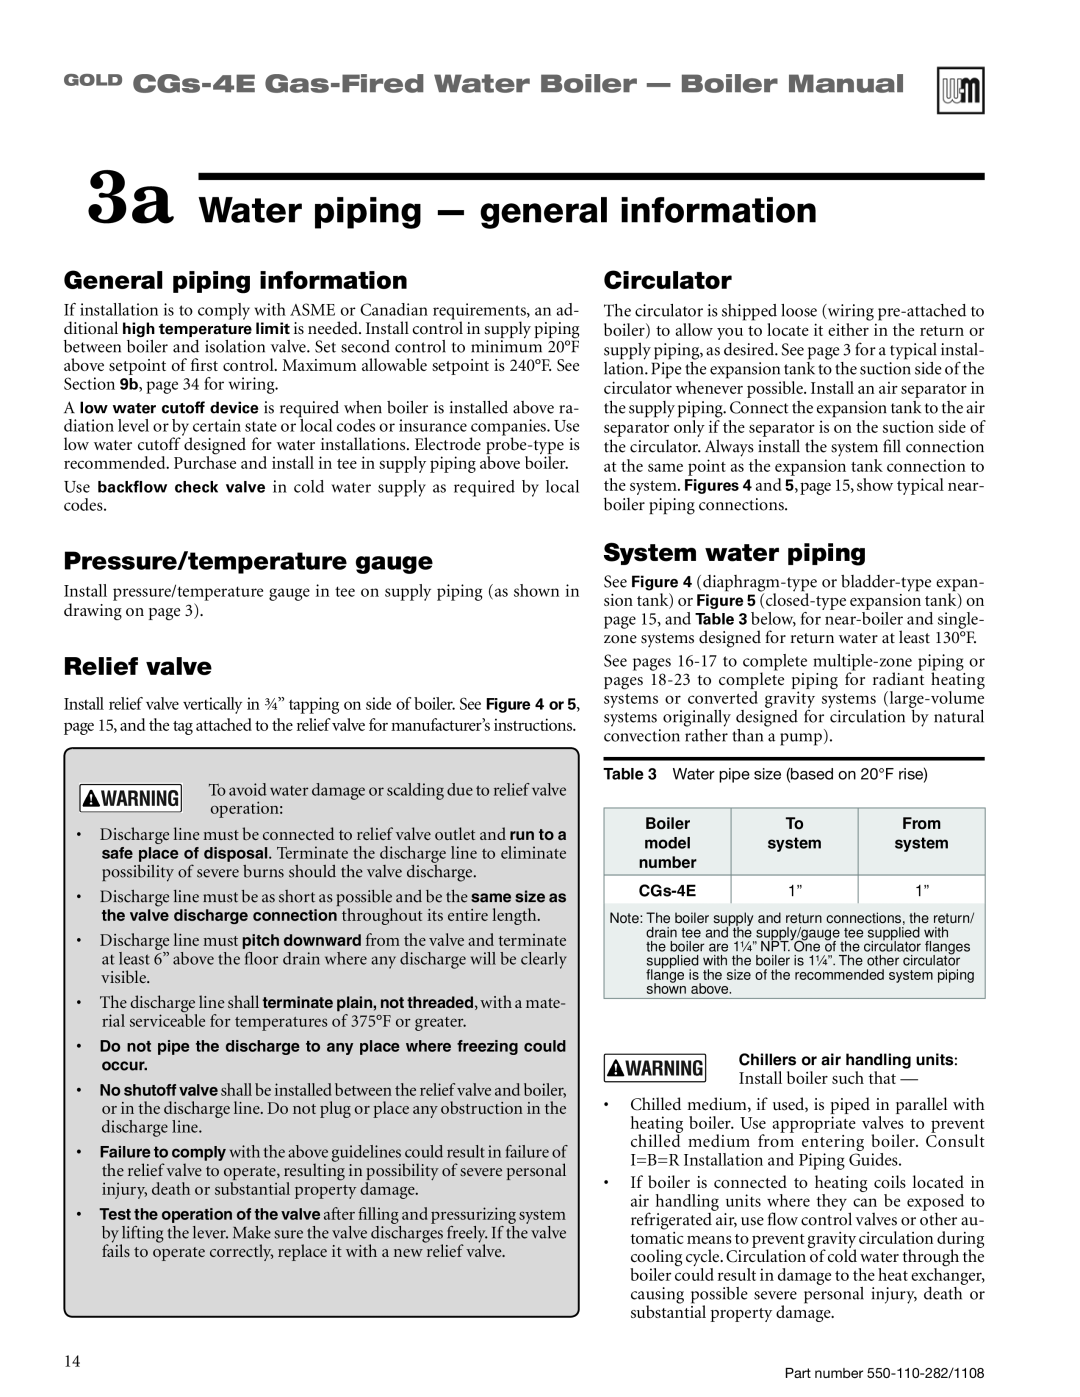 Weil-McLain CGS-4E manual 3a Water piping - general information, General piping information, Circulator, Relief valve 